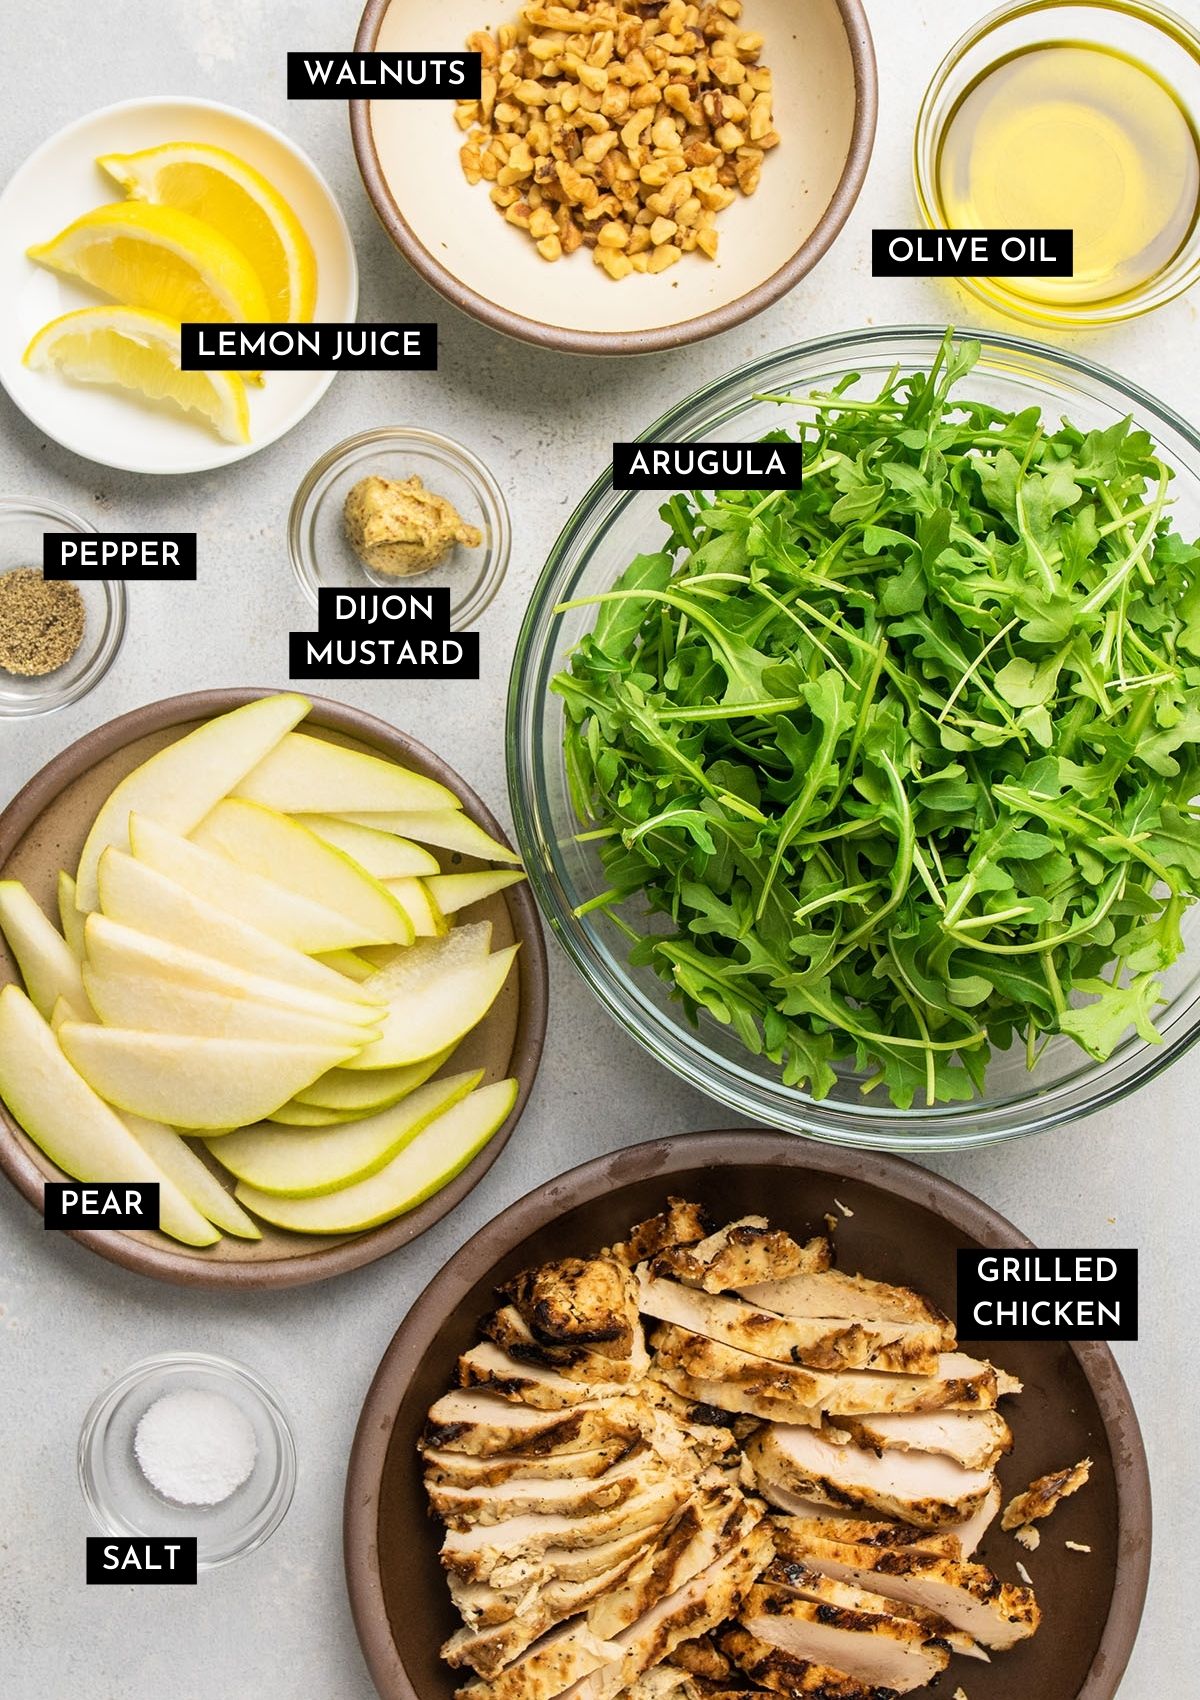 Recipe ingredients, organized into small bowls.